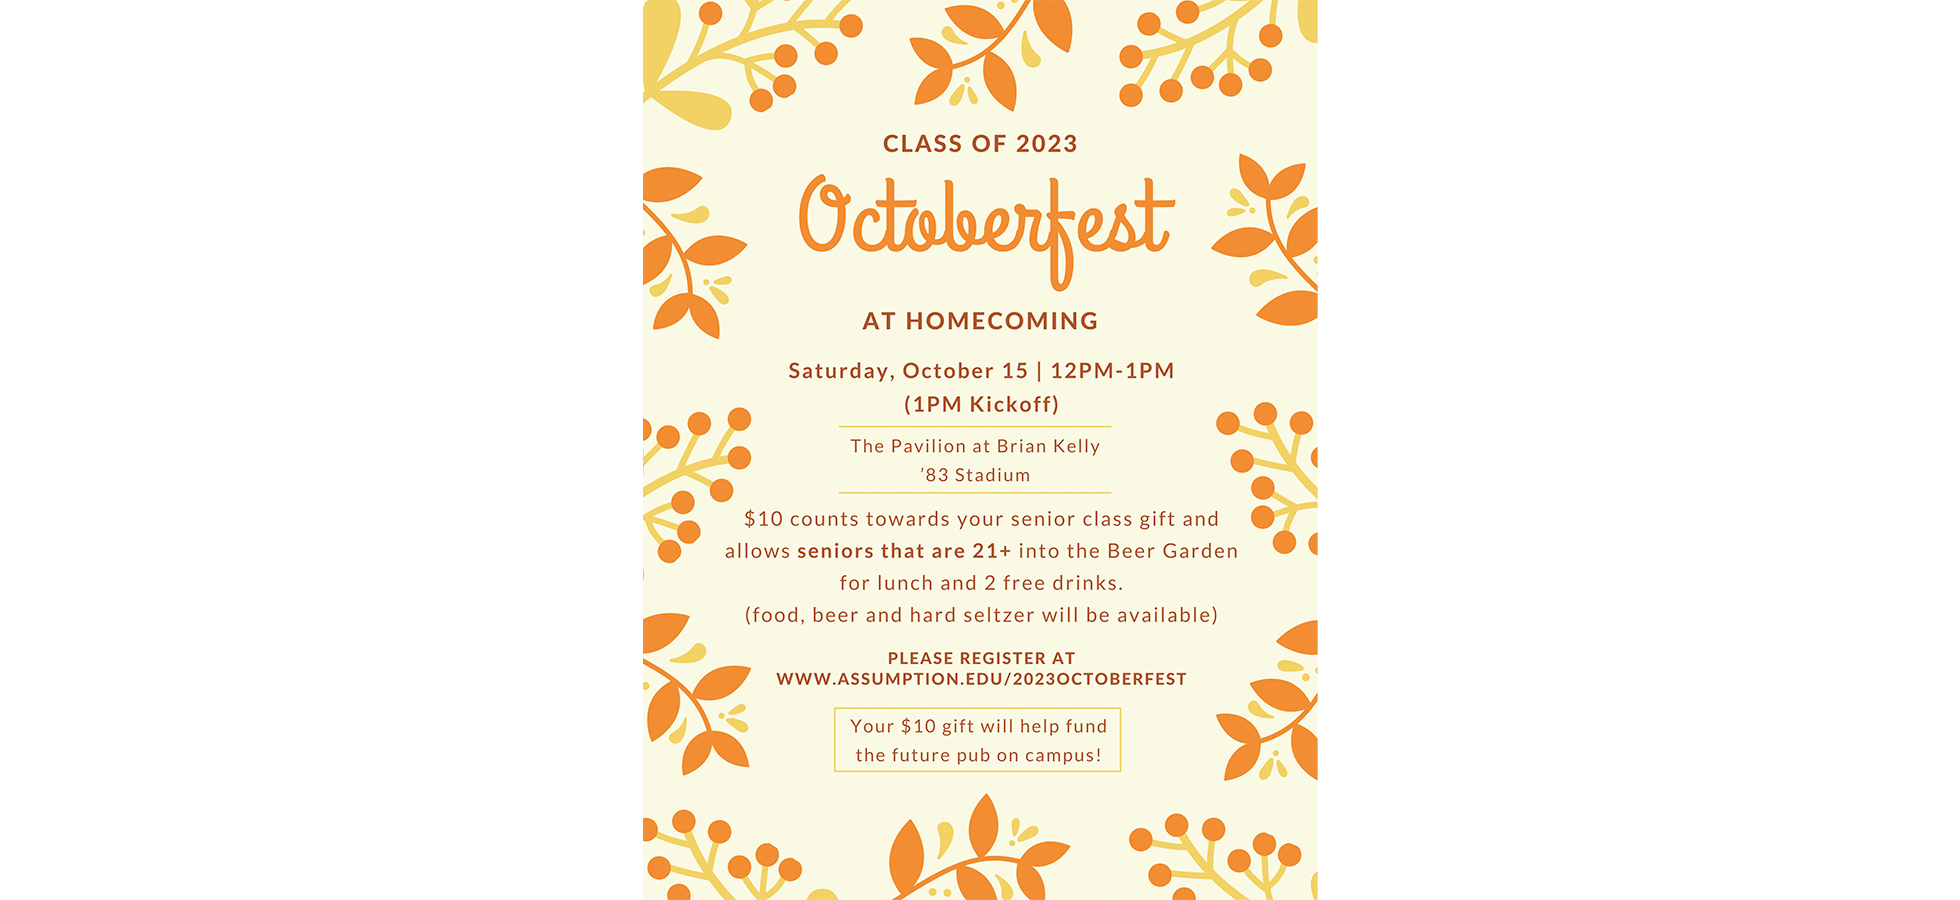 The Class of 2023 is invited to celebrate octoberfest on Saturday, October 15, 2022